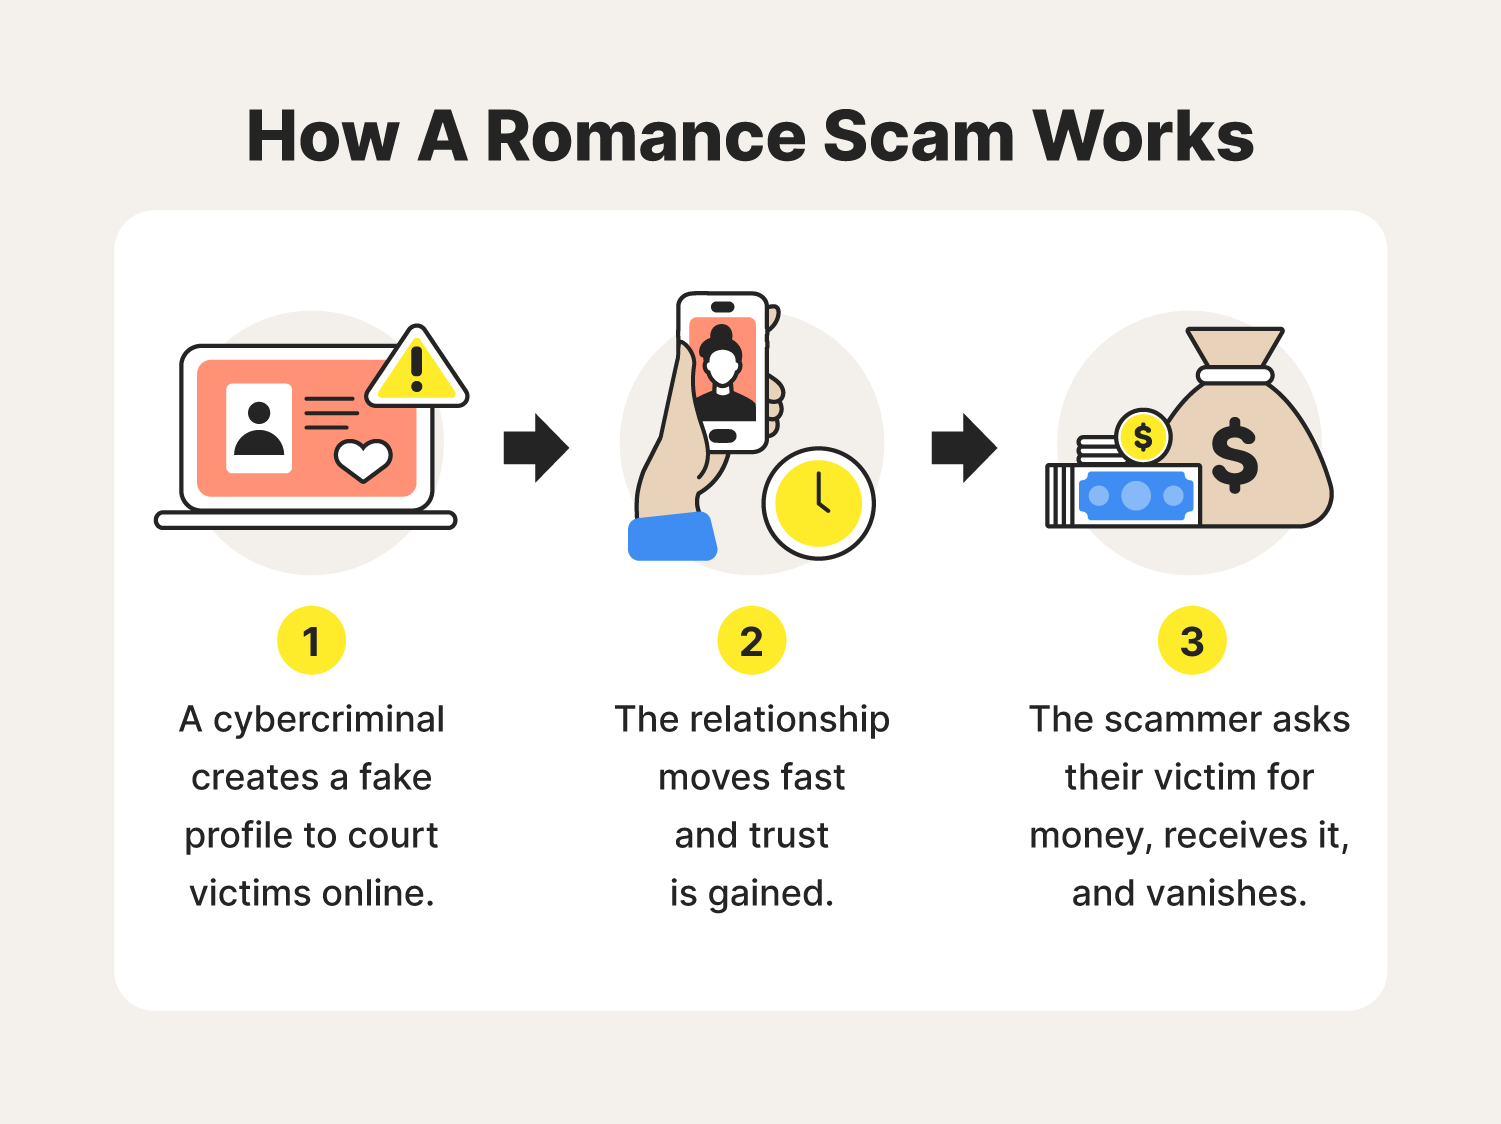 Three illustrations accompany the steps of how romance scams work